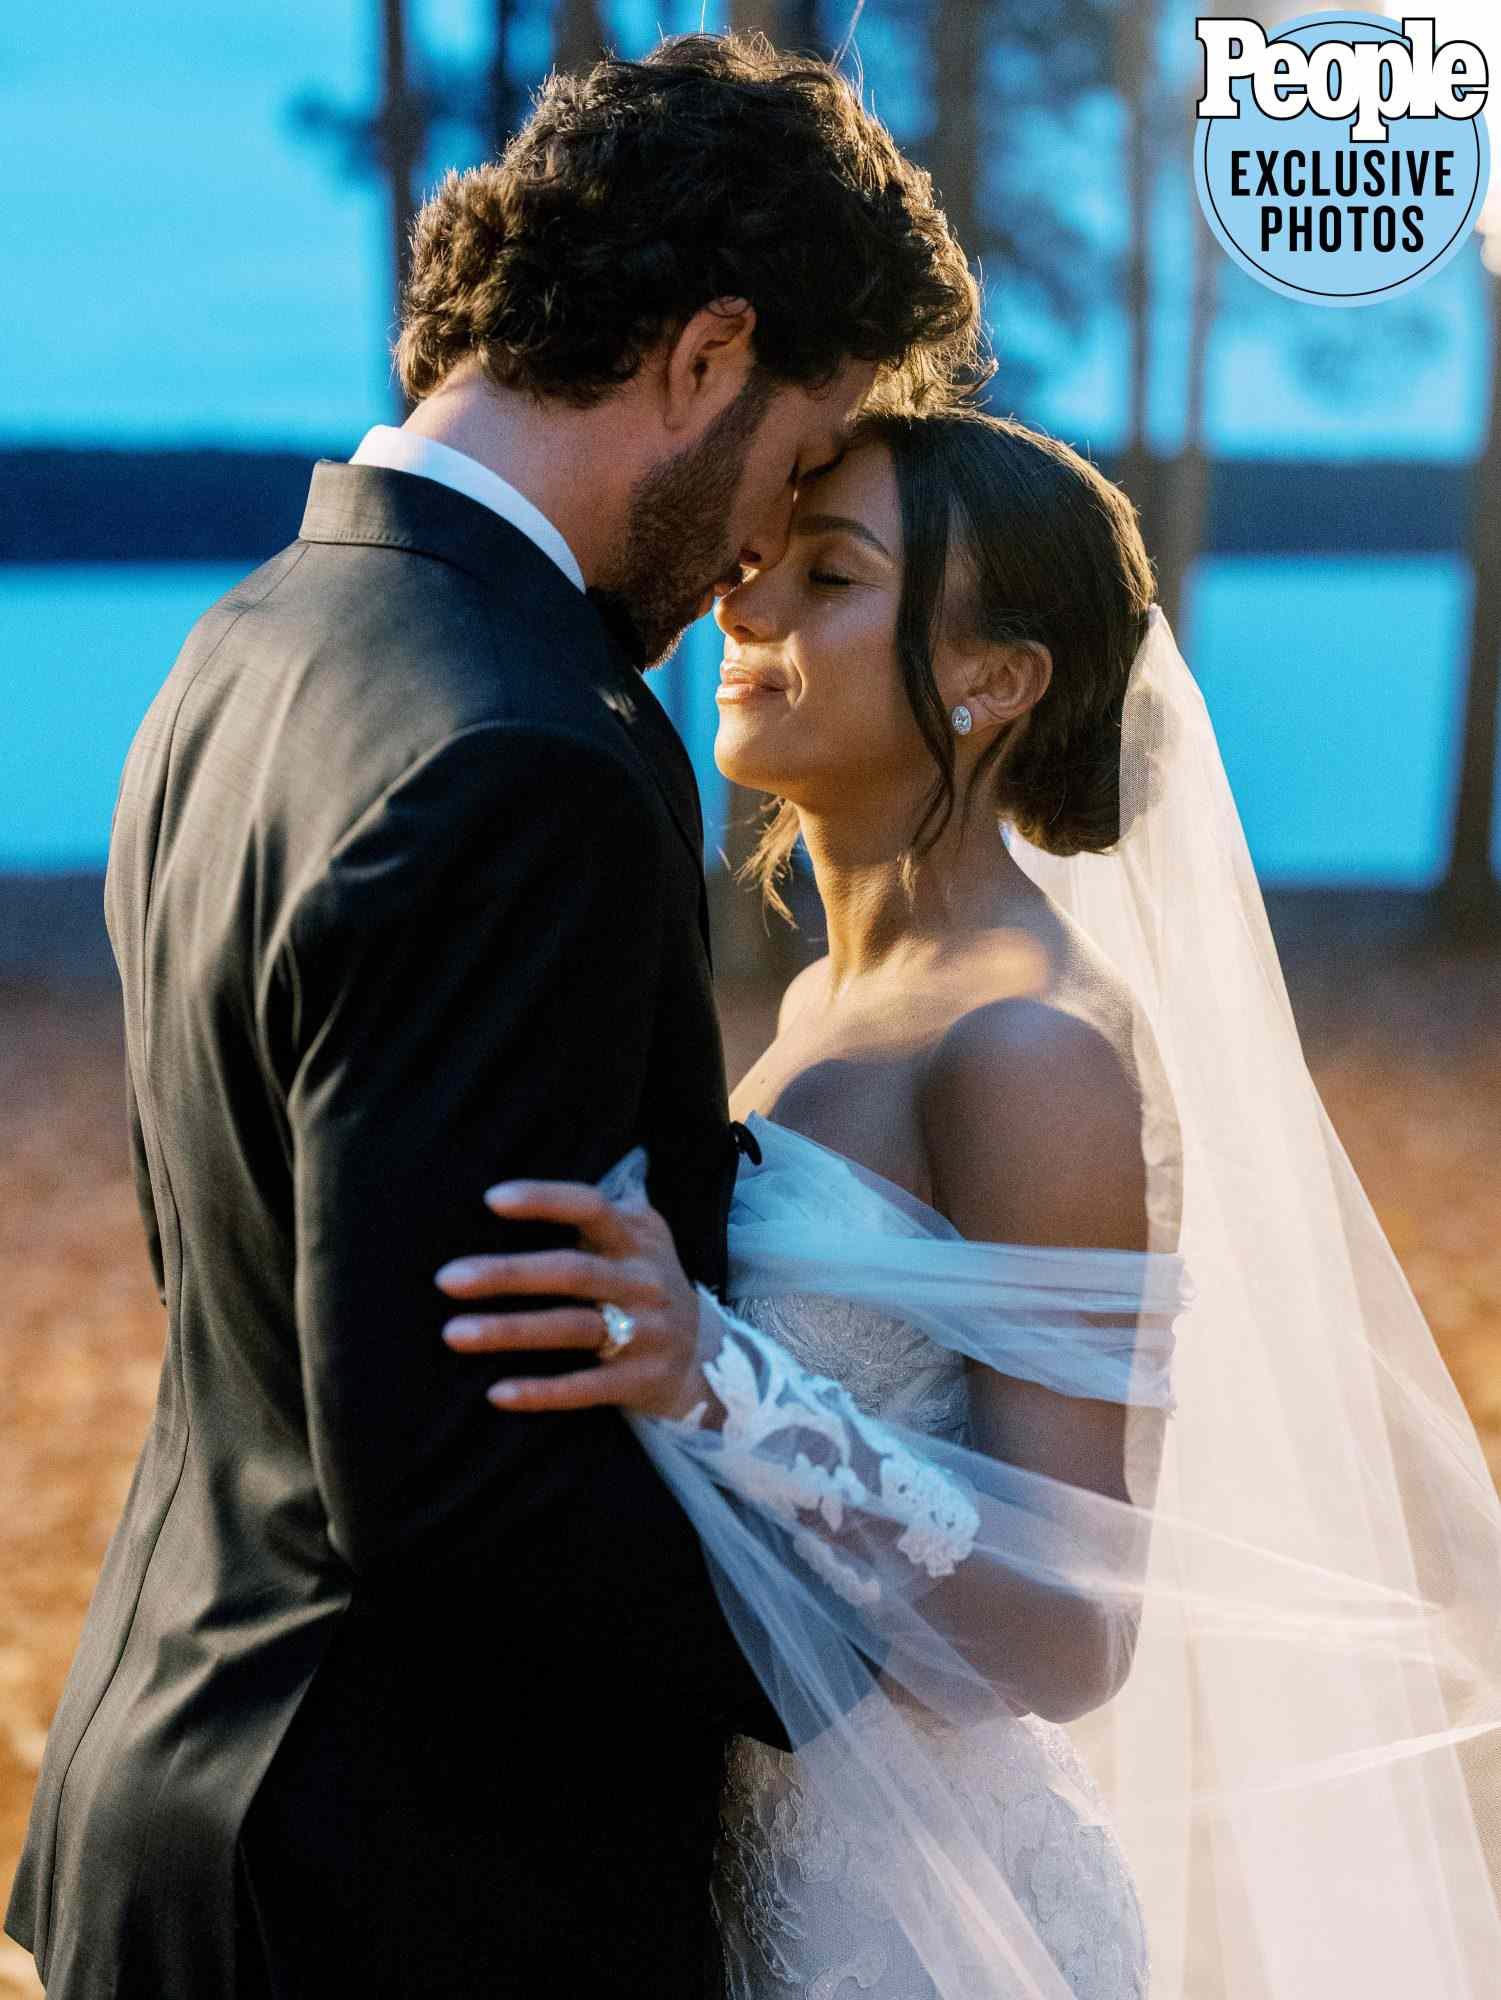 Mallory-Pugh-and-Dansby-Swanson-121122-bridal by alexandria hudson valley makeup and hair alexandria gilleo .jpeg